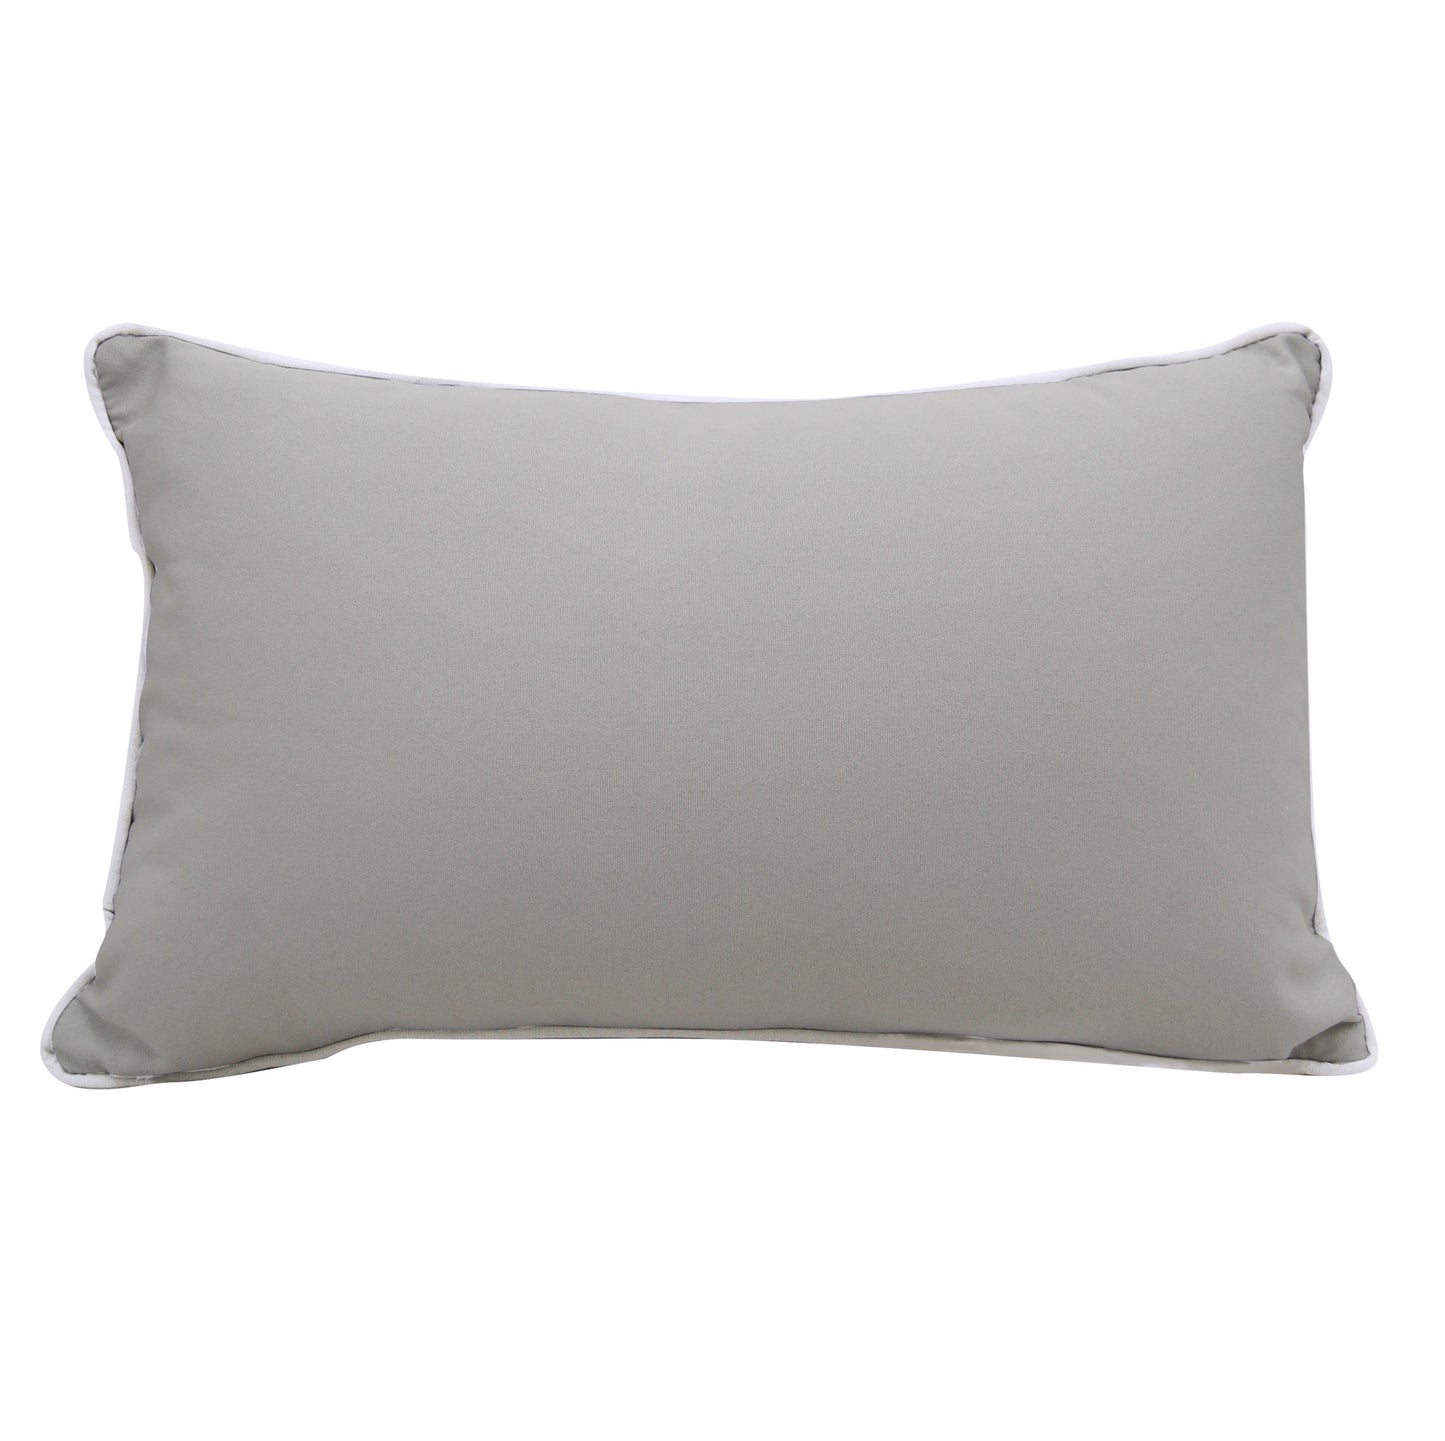 Solid gray fabric; back side of the Fish Pattern Lumbar Indoor Outdoor Pillow.